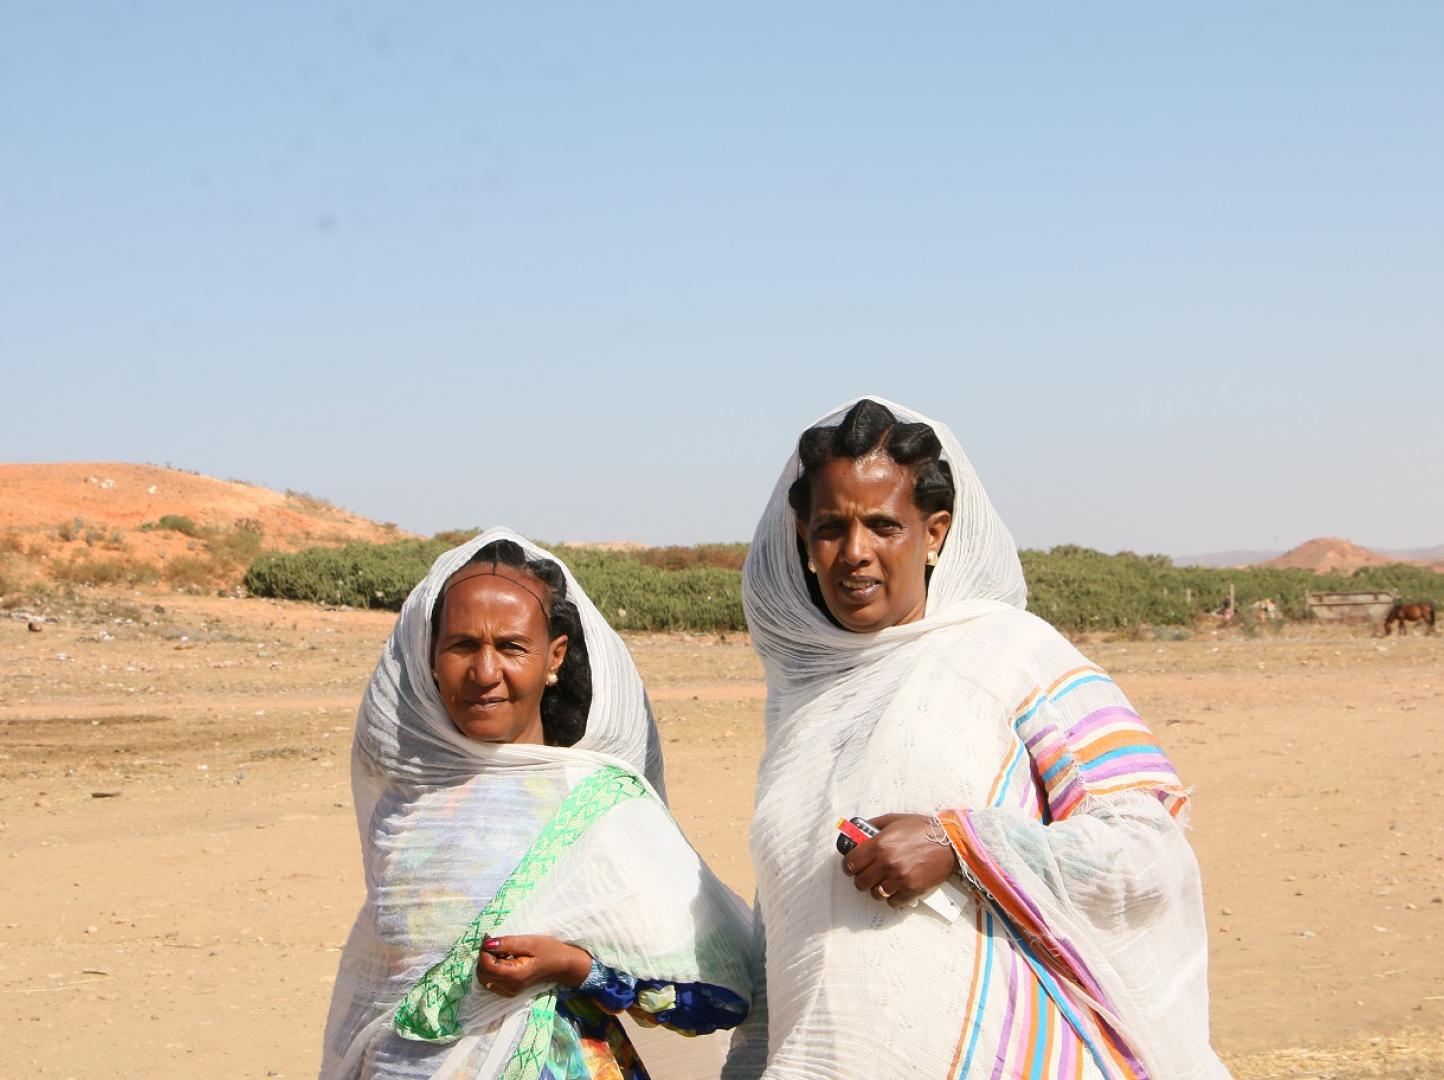 Genet Mahari (left) and Tieba Abraha are trained community health volunteers who go house to house in their community and can screen and detect malnutrition among children under five. 